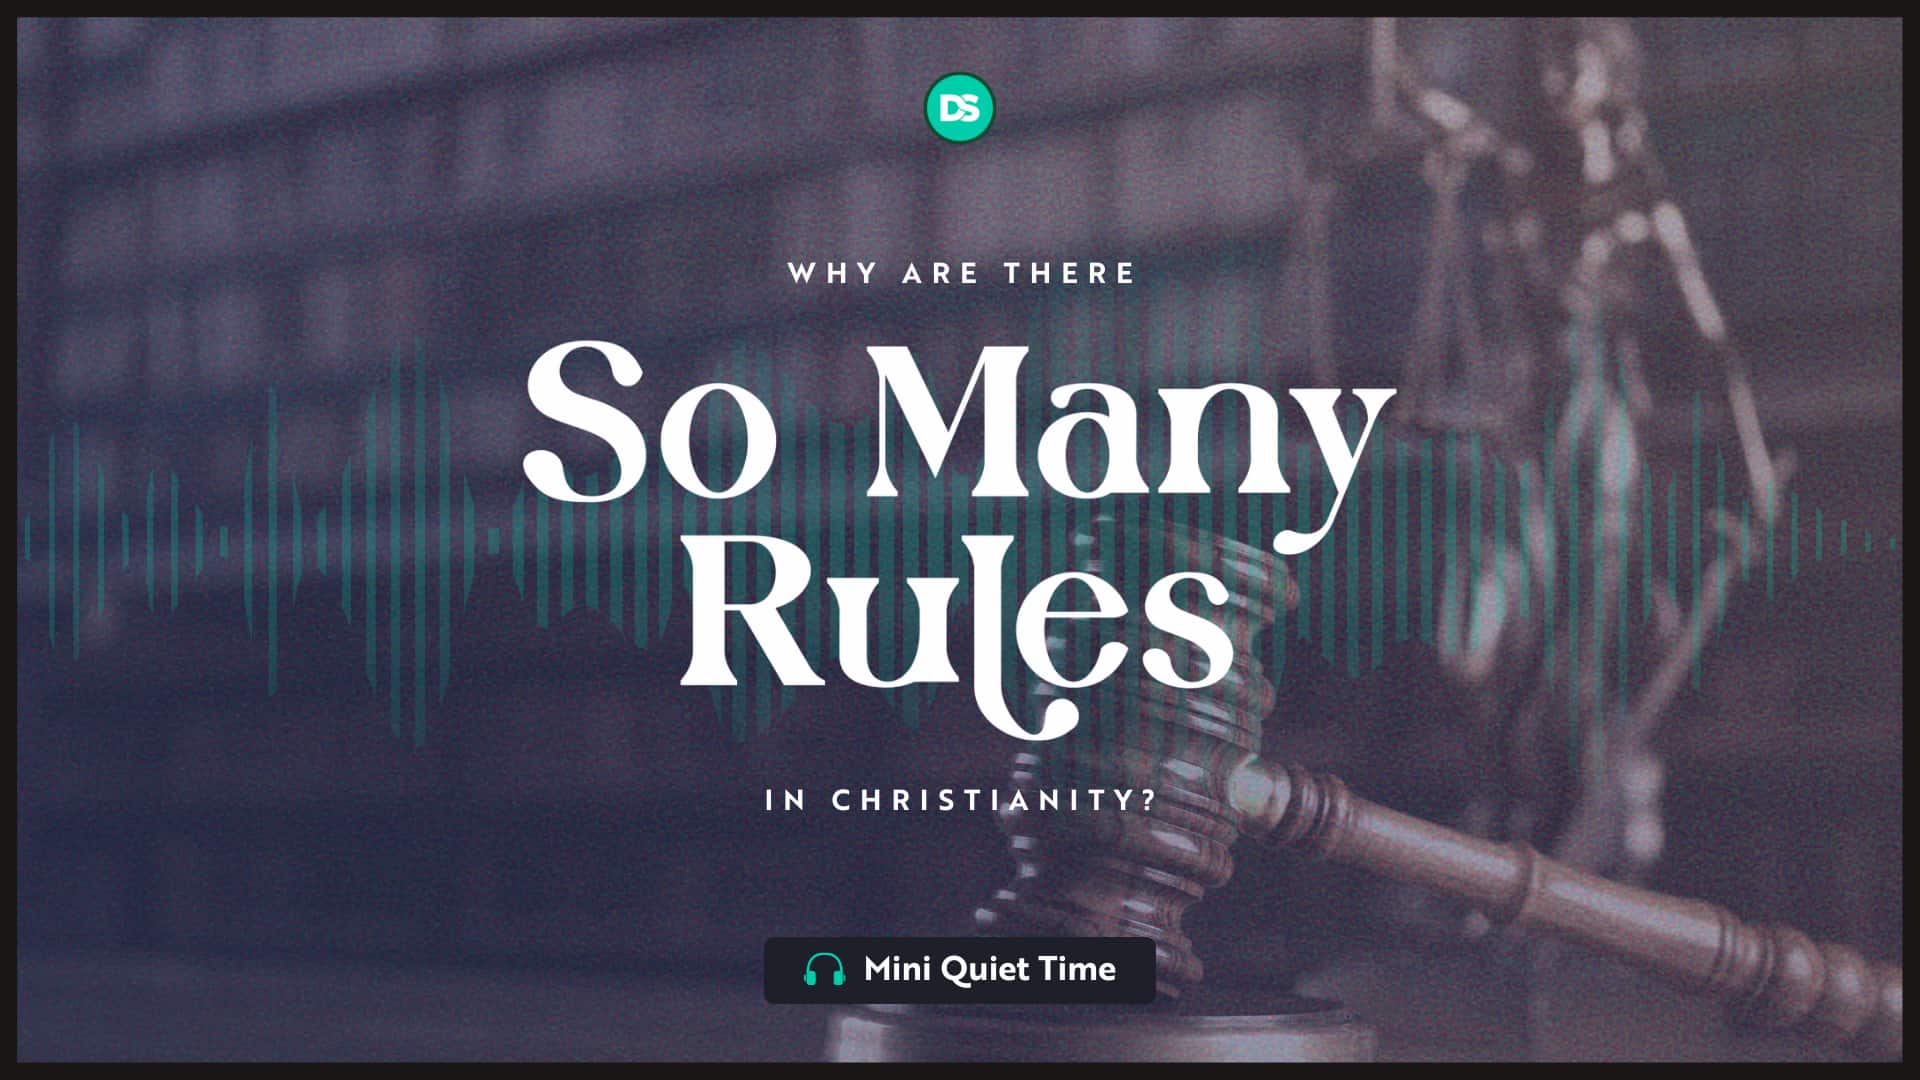 Why Are There So Many Rules in Christianity? 2